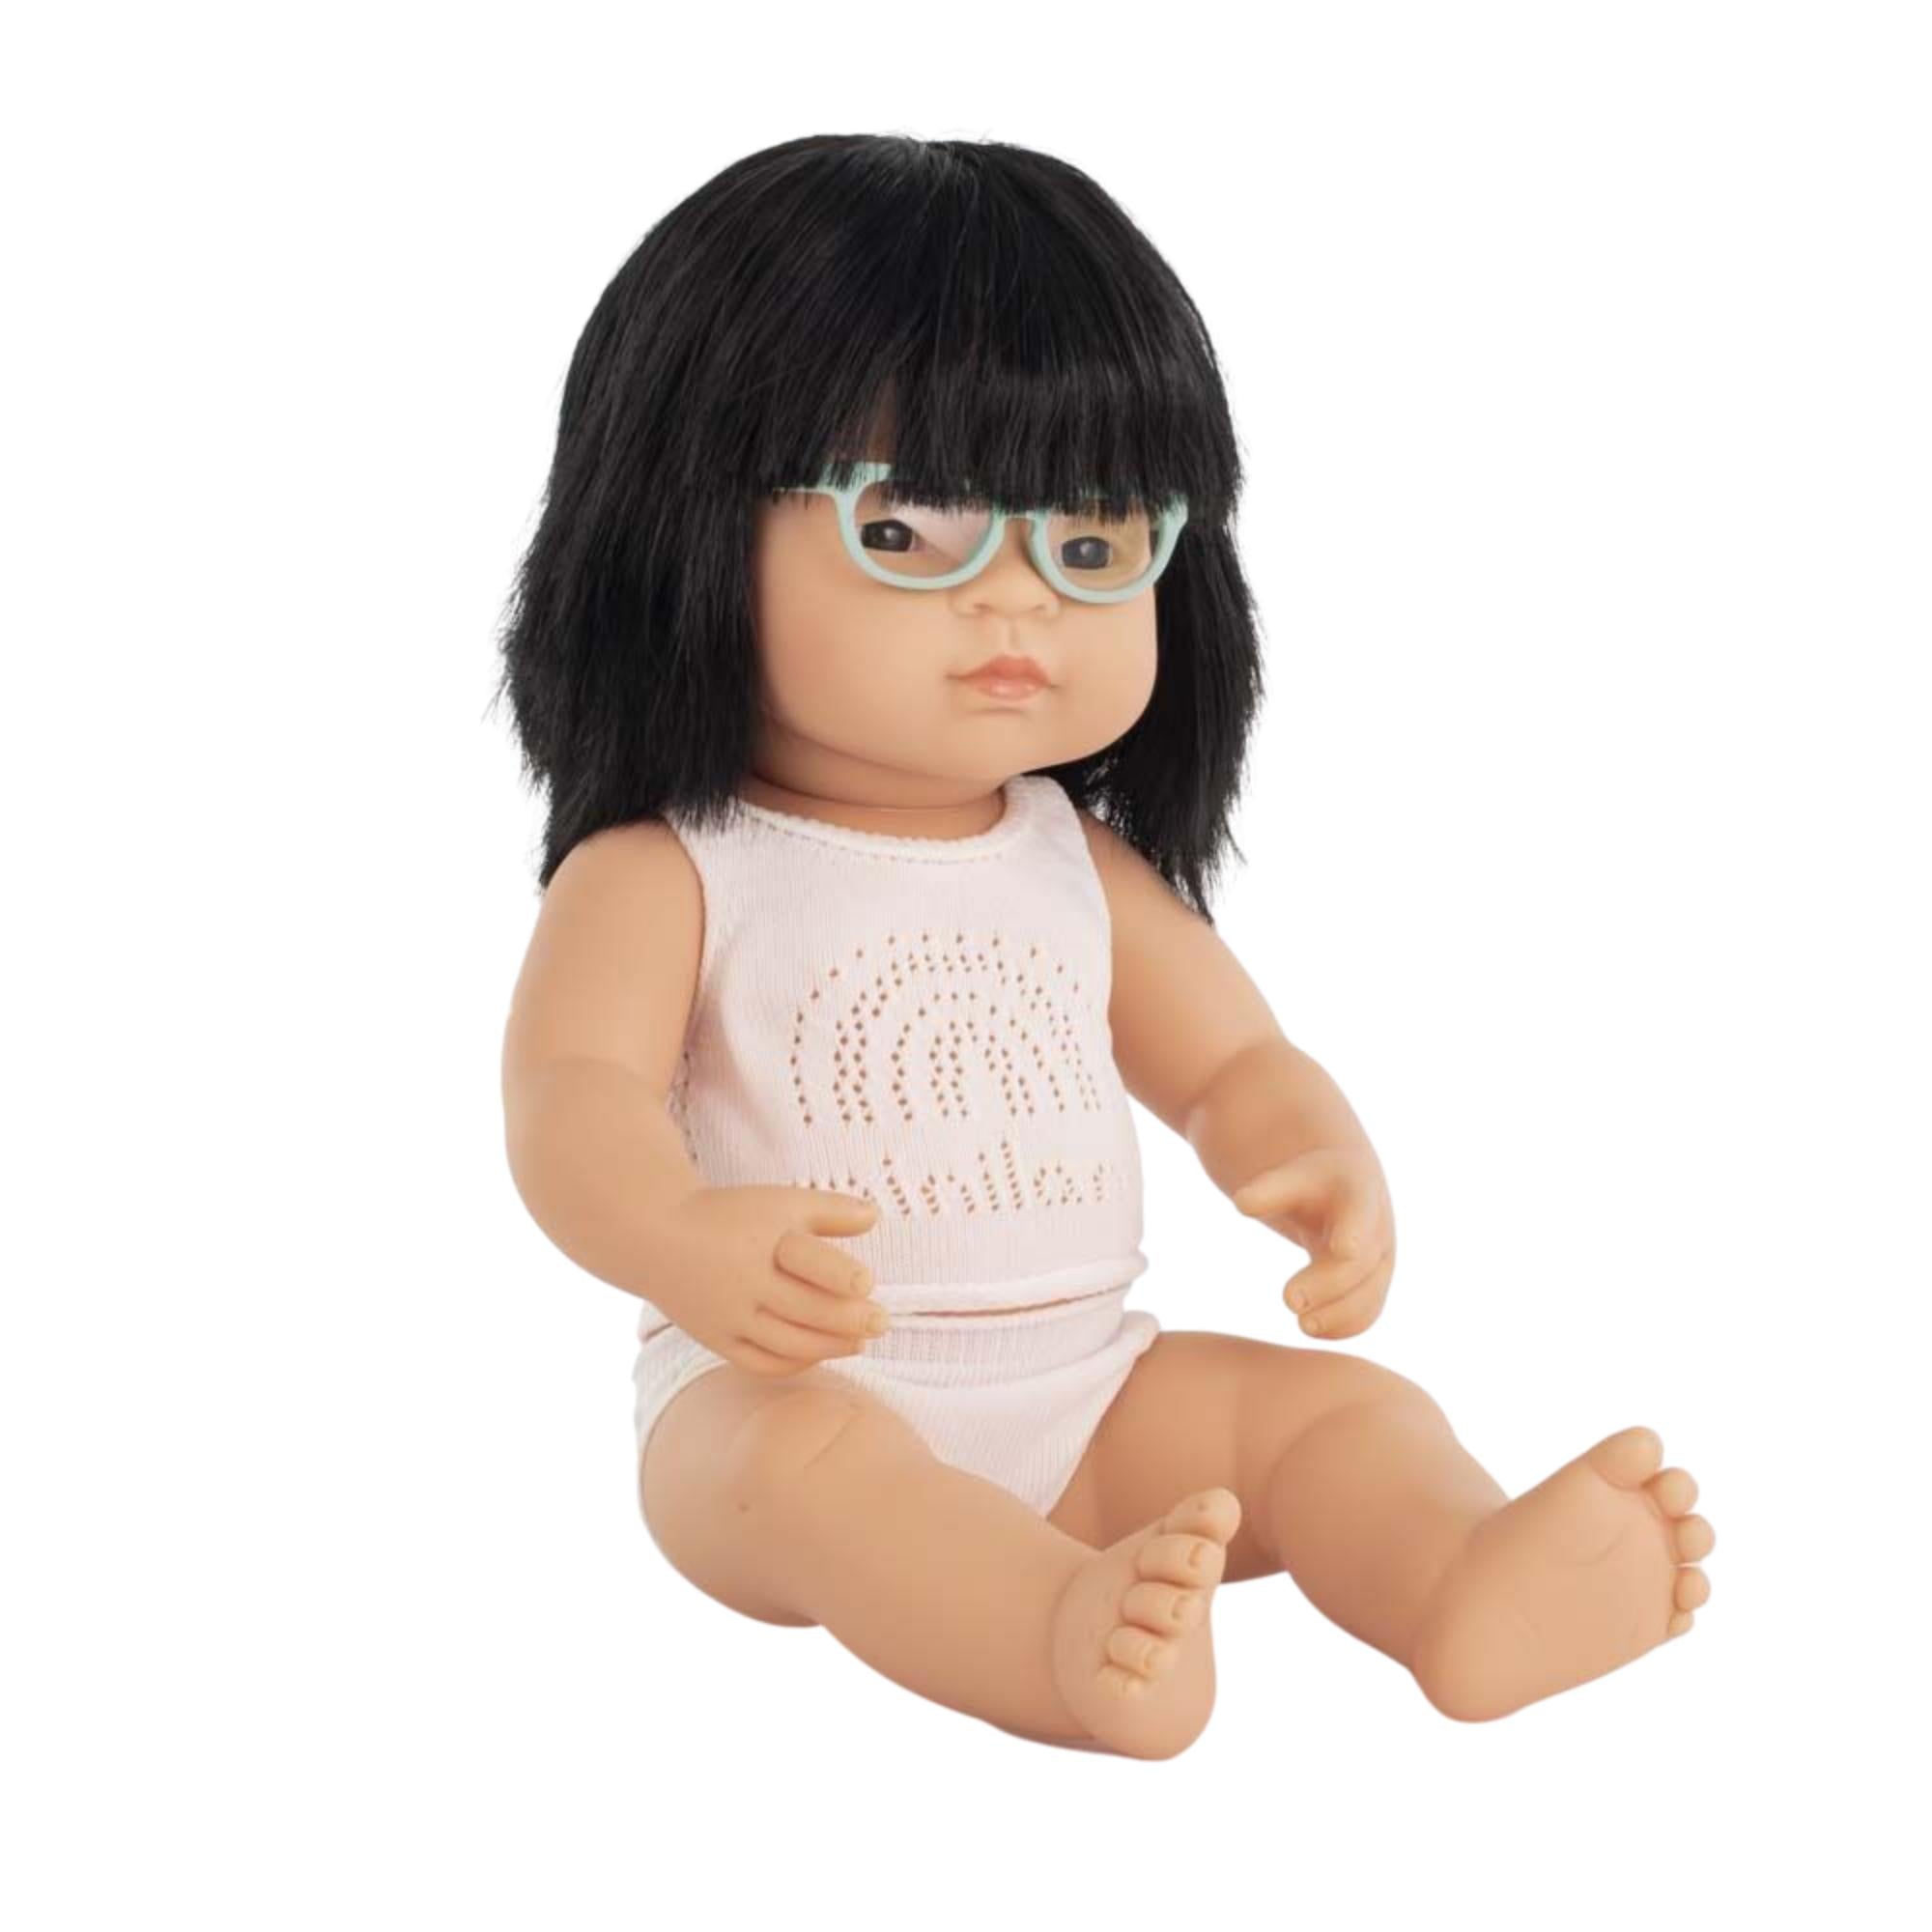 Asian Girl with Glasses 38cm Doll by Miniland - Fox and Roo